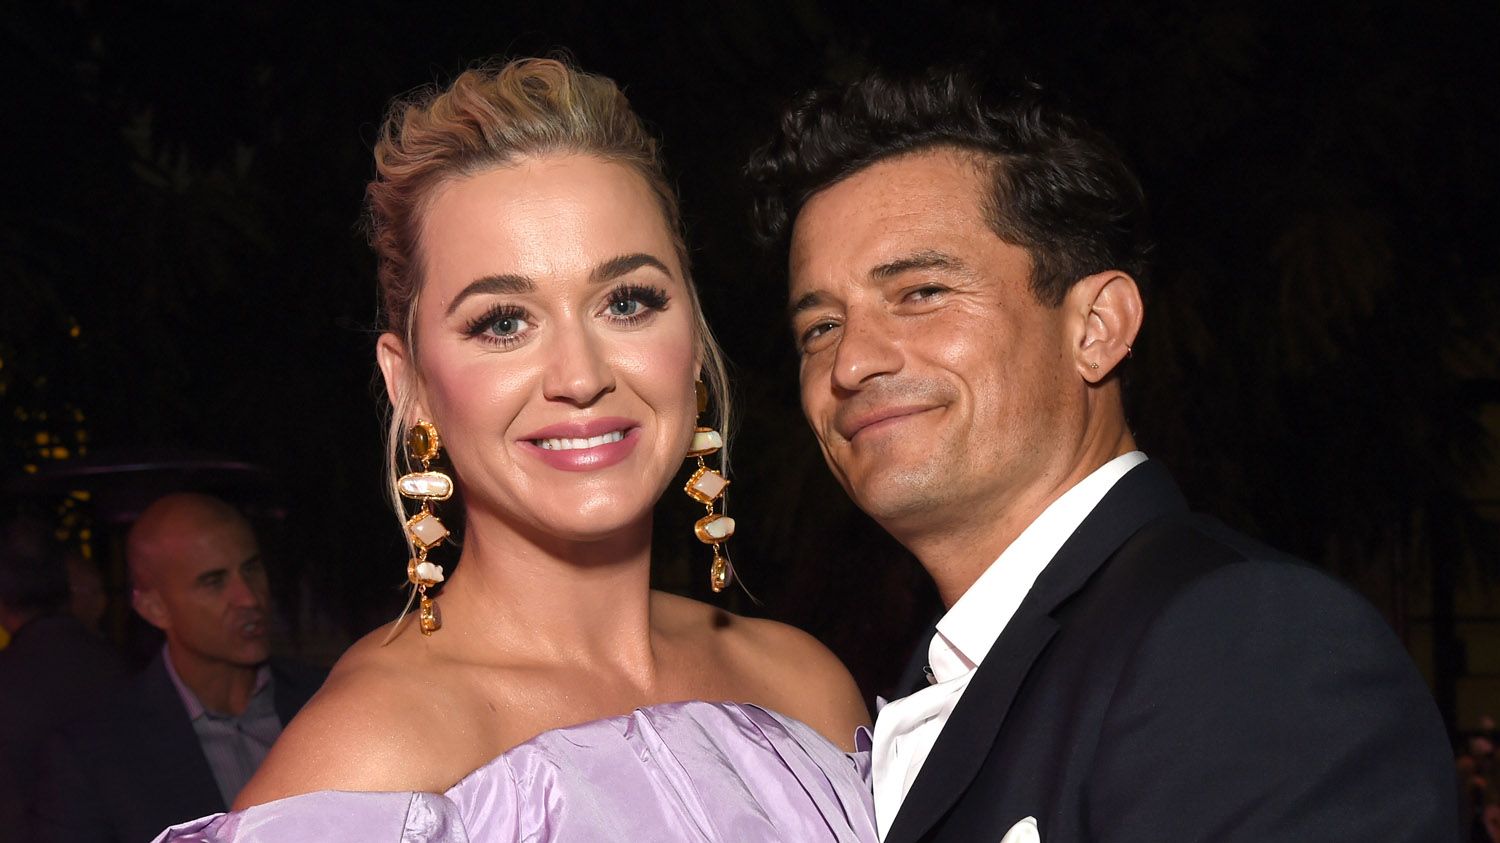 Katy Perry shares the sweetest birthday tribute to Orlando Bloom